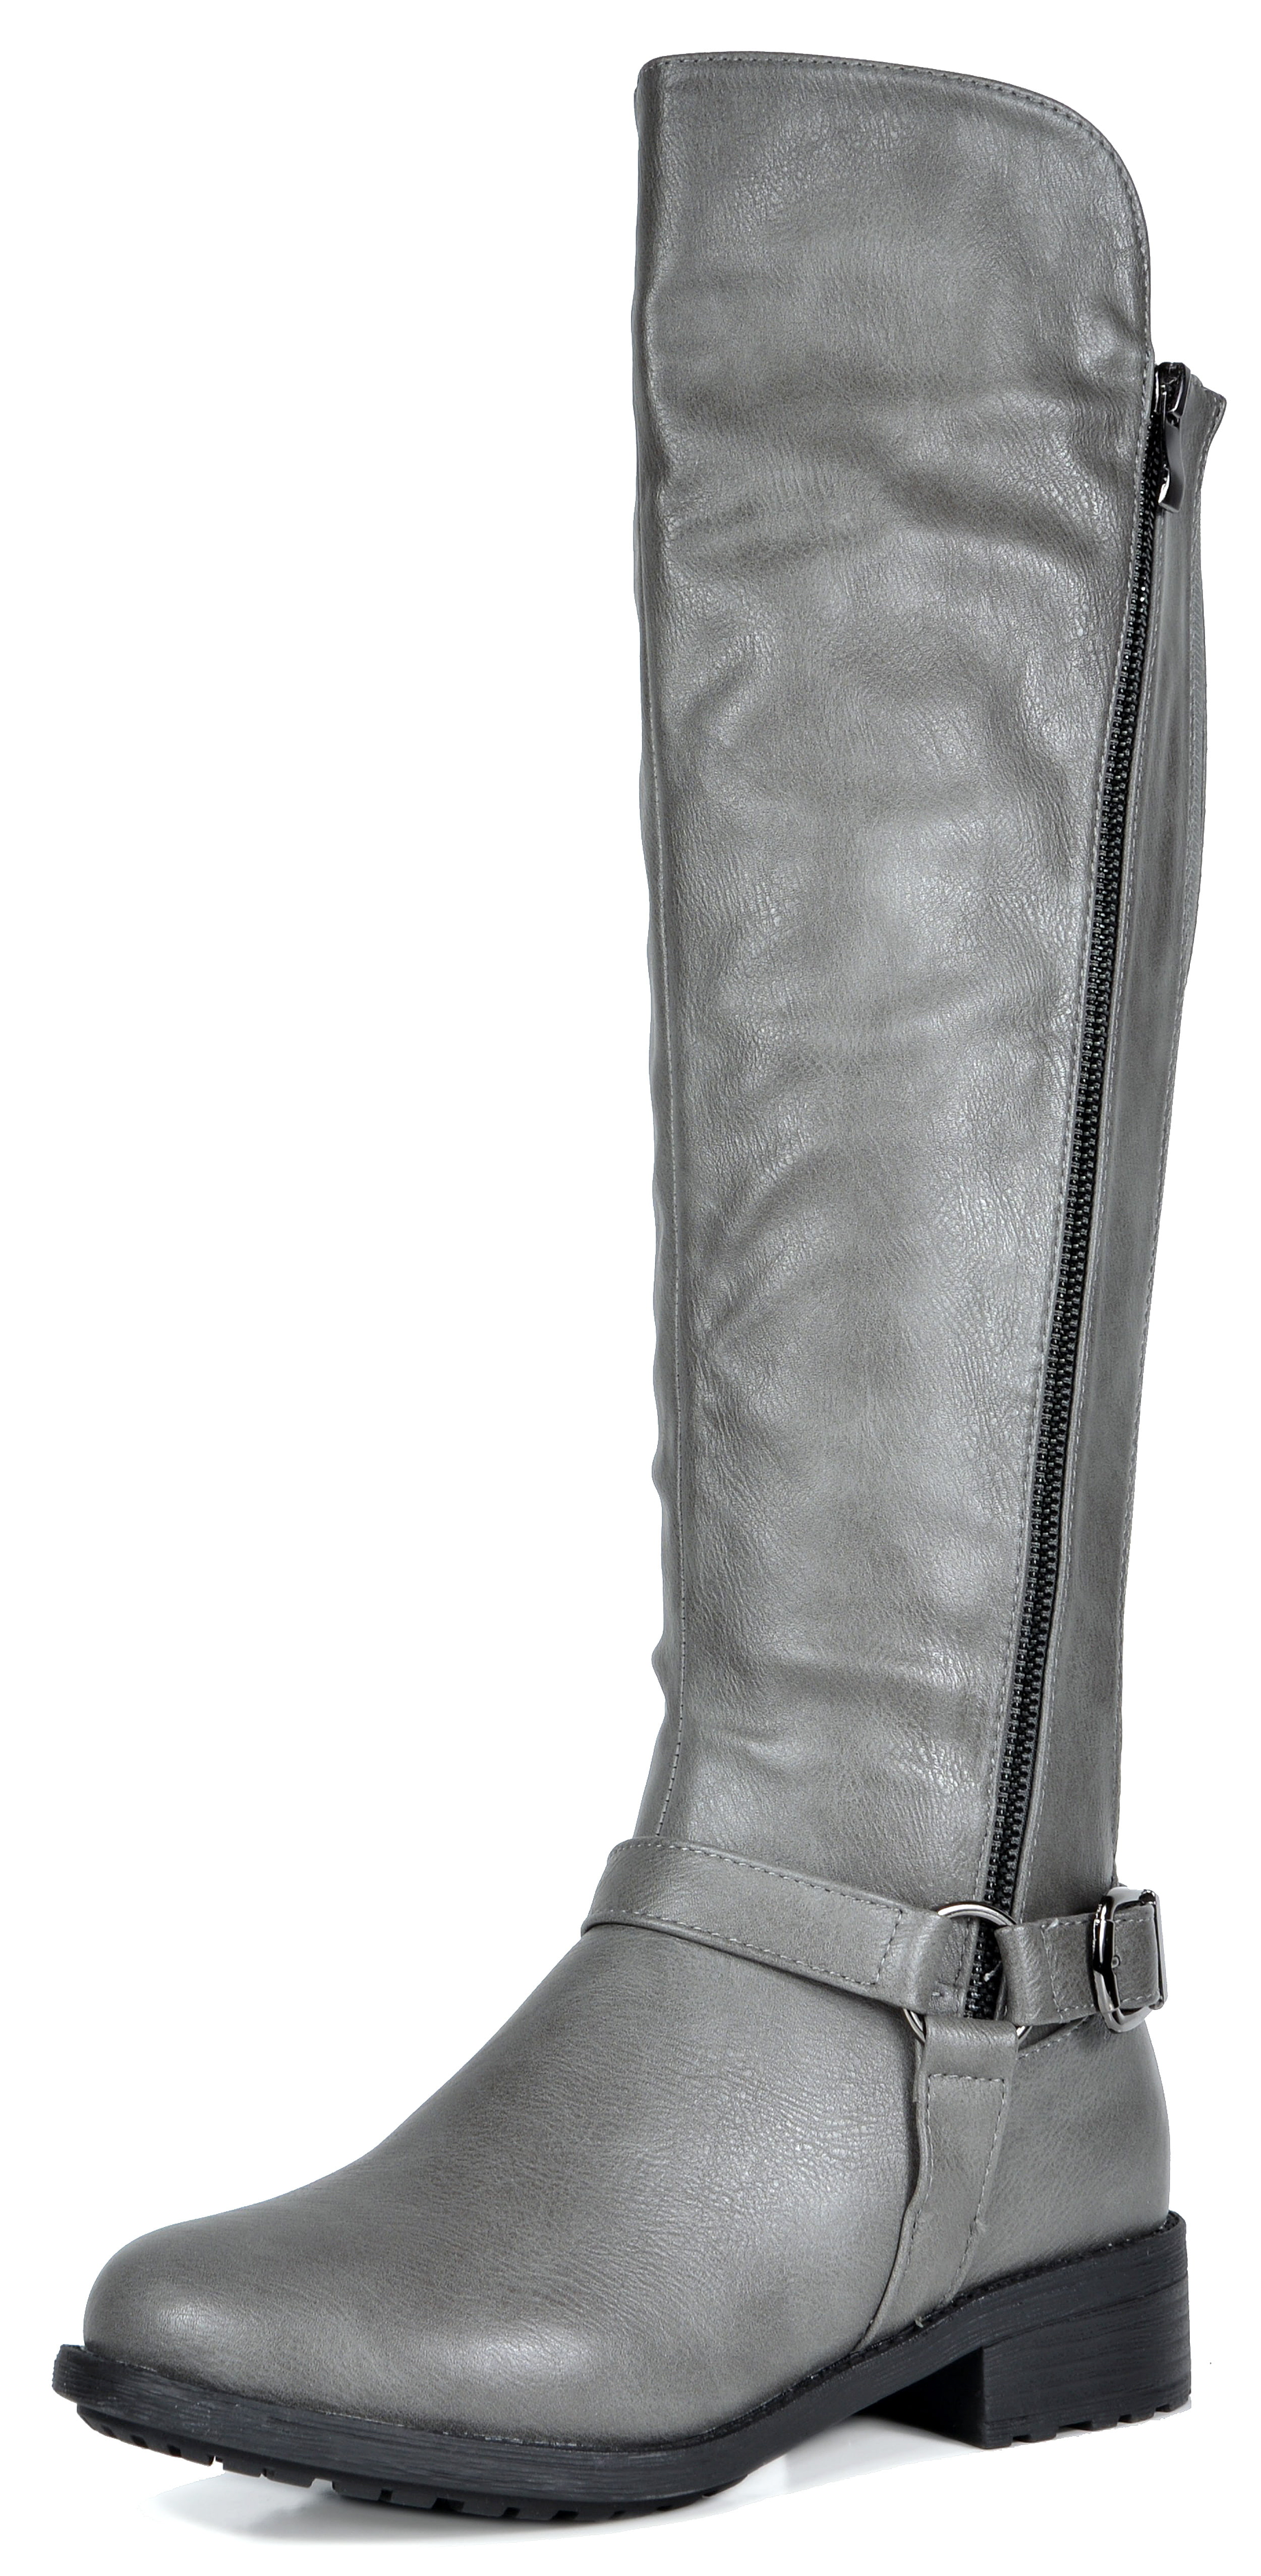 LADIES WOMENS KNEE HIGH FUR LINED FAUX LEATHER FLAT LOW HEEL BIKER RIDING BOOTS 